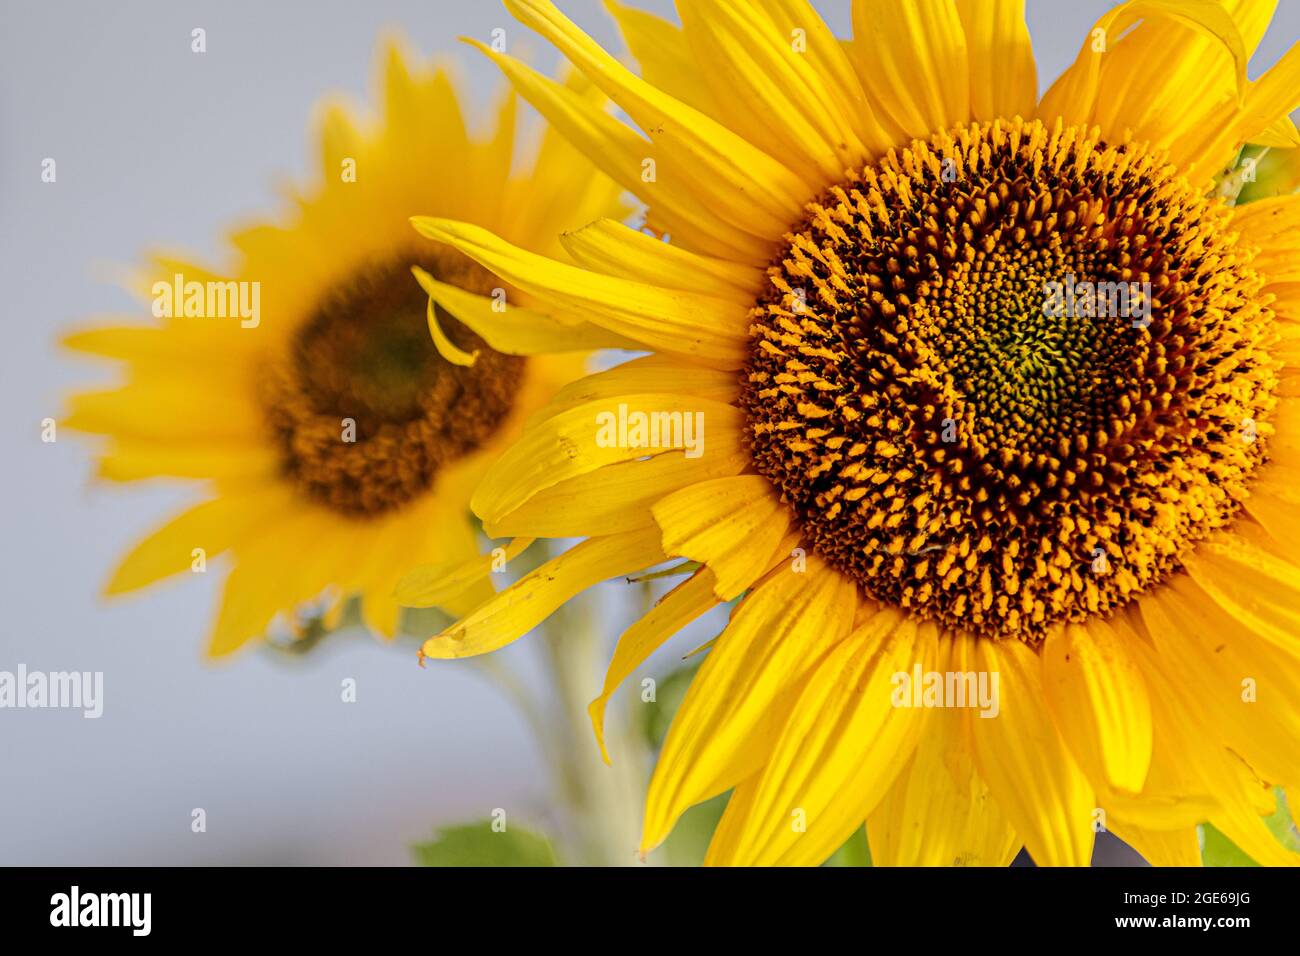 Freshly cut sunflowers in a vase photographed in a studio. Stock Photo